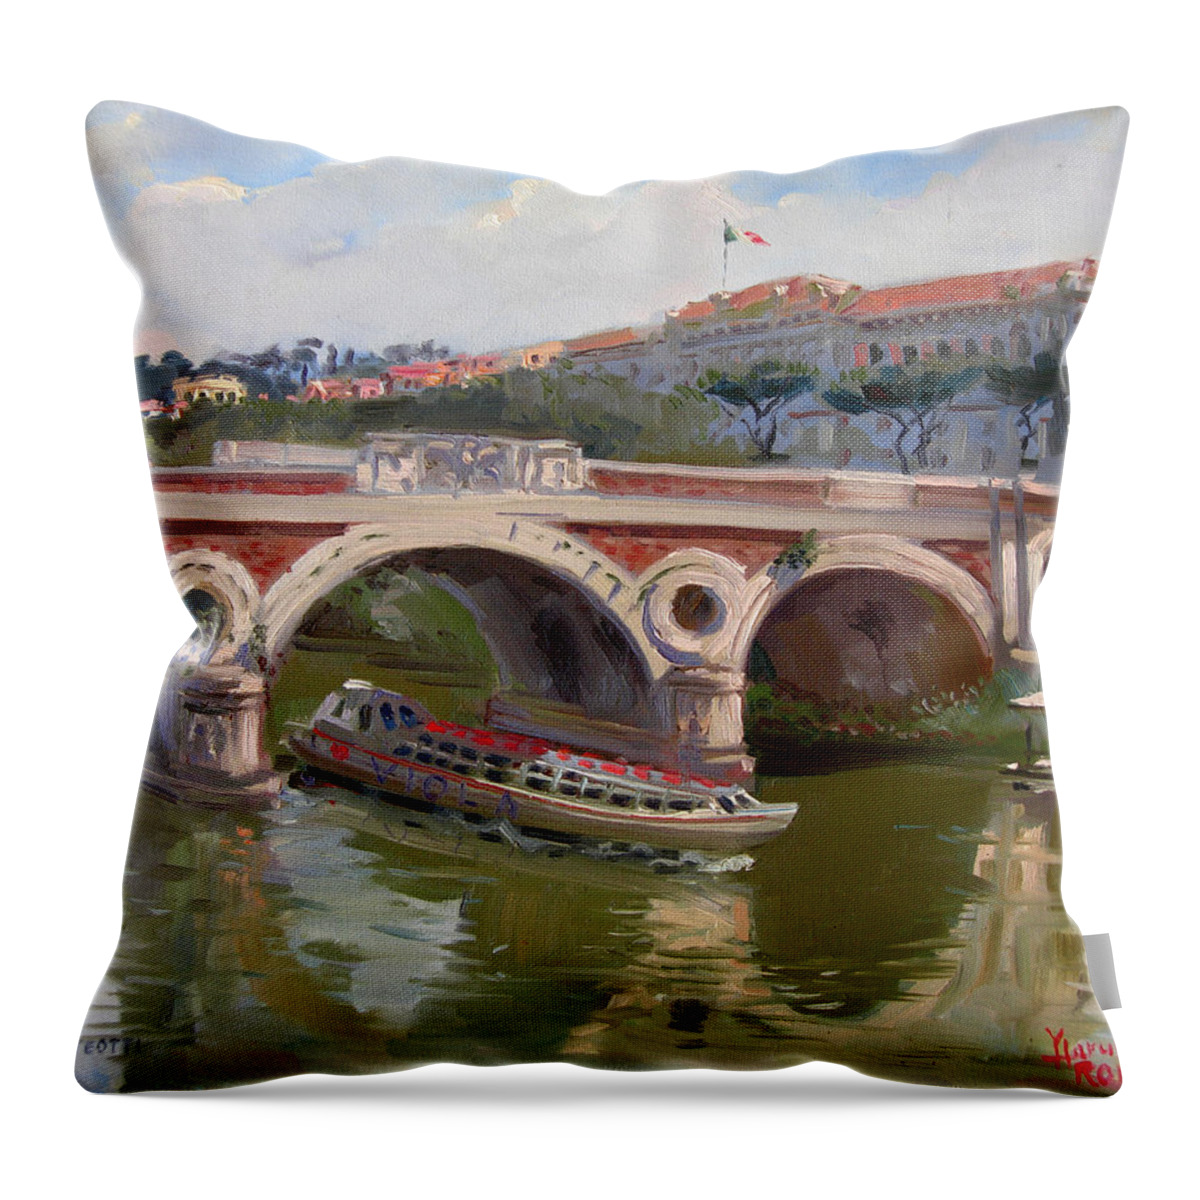 Rome Throw Pillow featuring the painting Rome Ponte Matteotti by Ylli Haruni